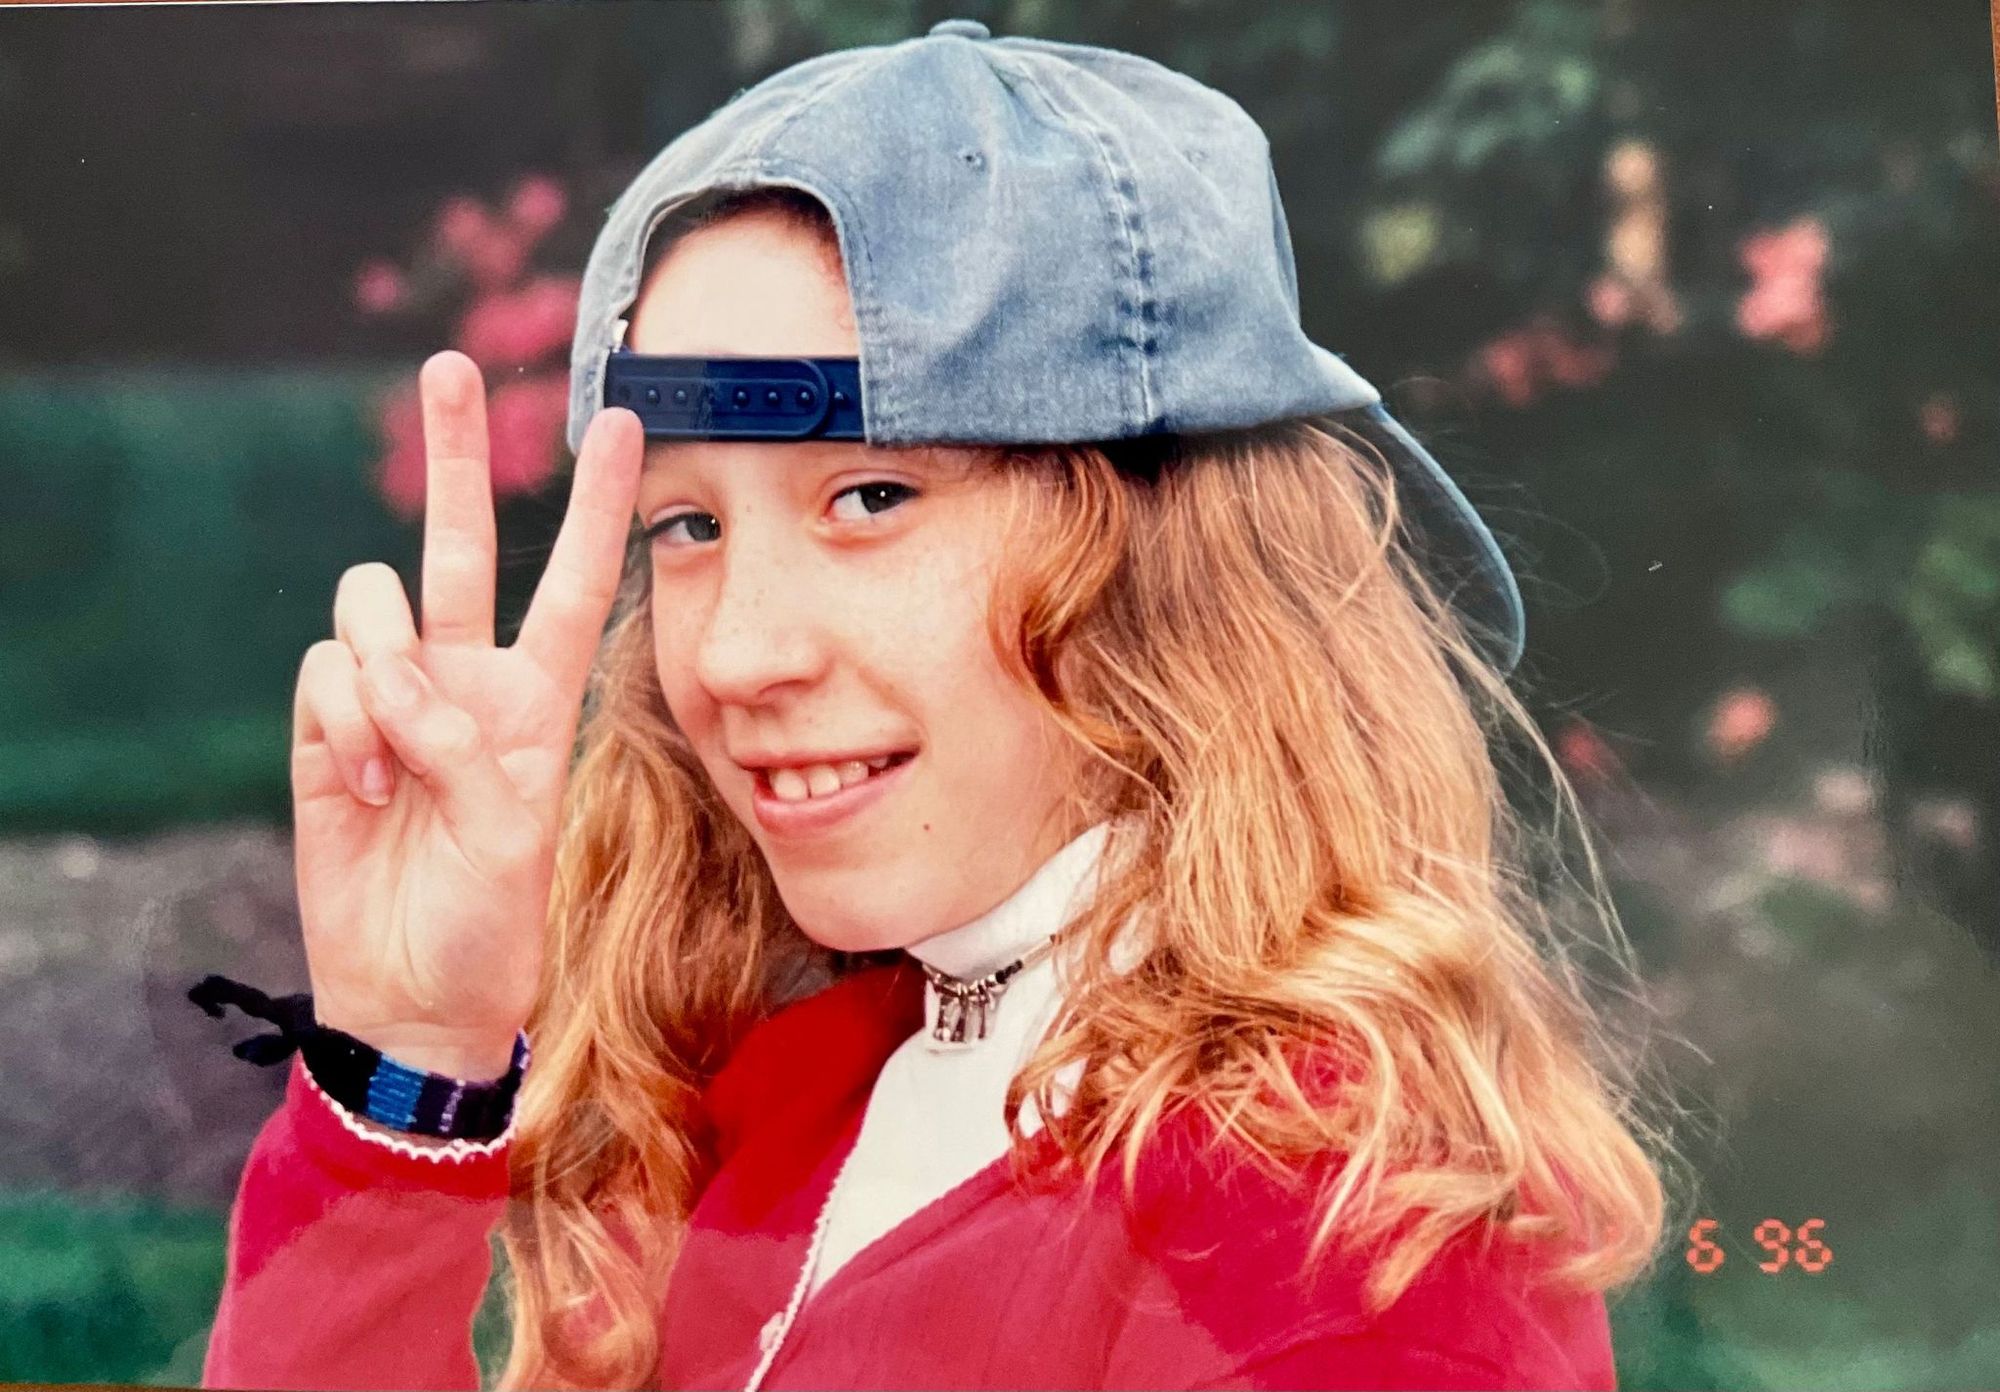 An old picture of Kat at 10-years-old wearing a backwards baseball cap and giving a peace sign to the camera